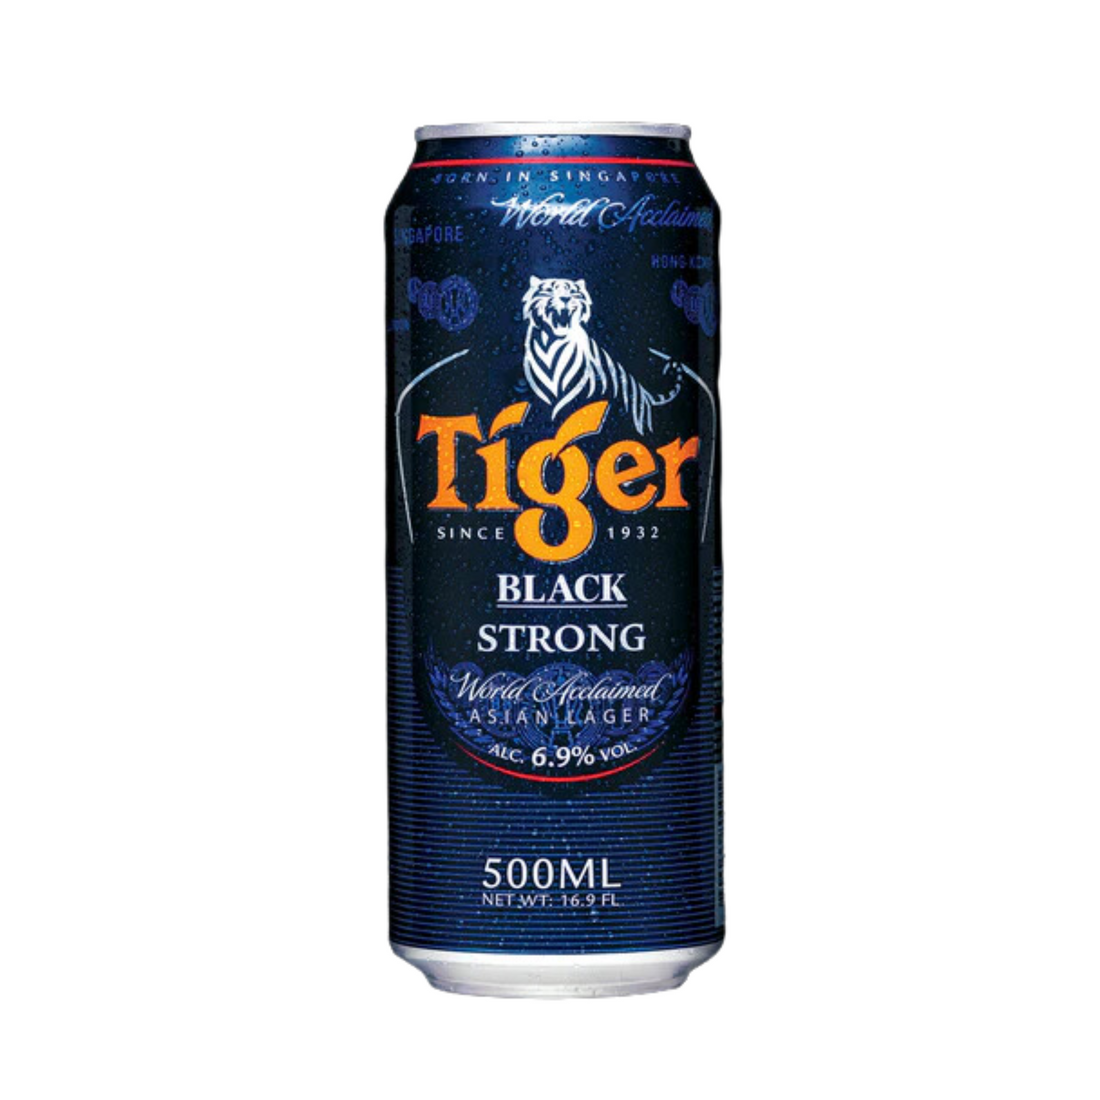 Tiger Black Strong, 500ml x 6 Cans